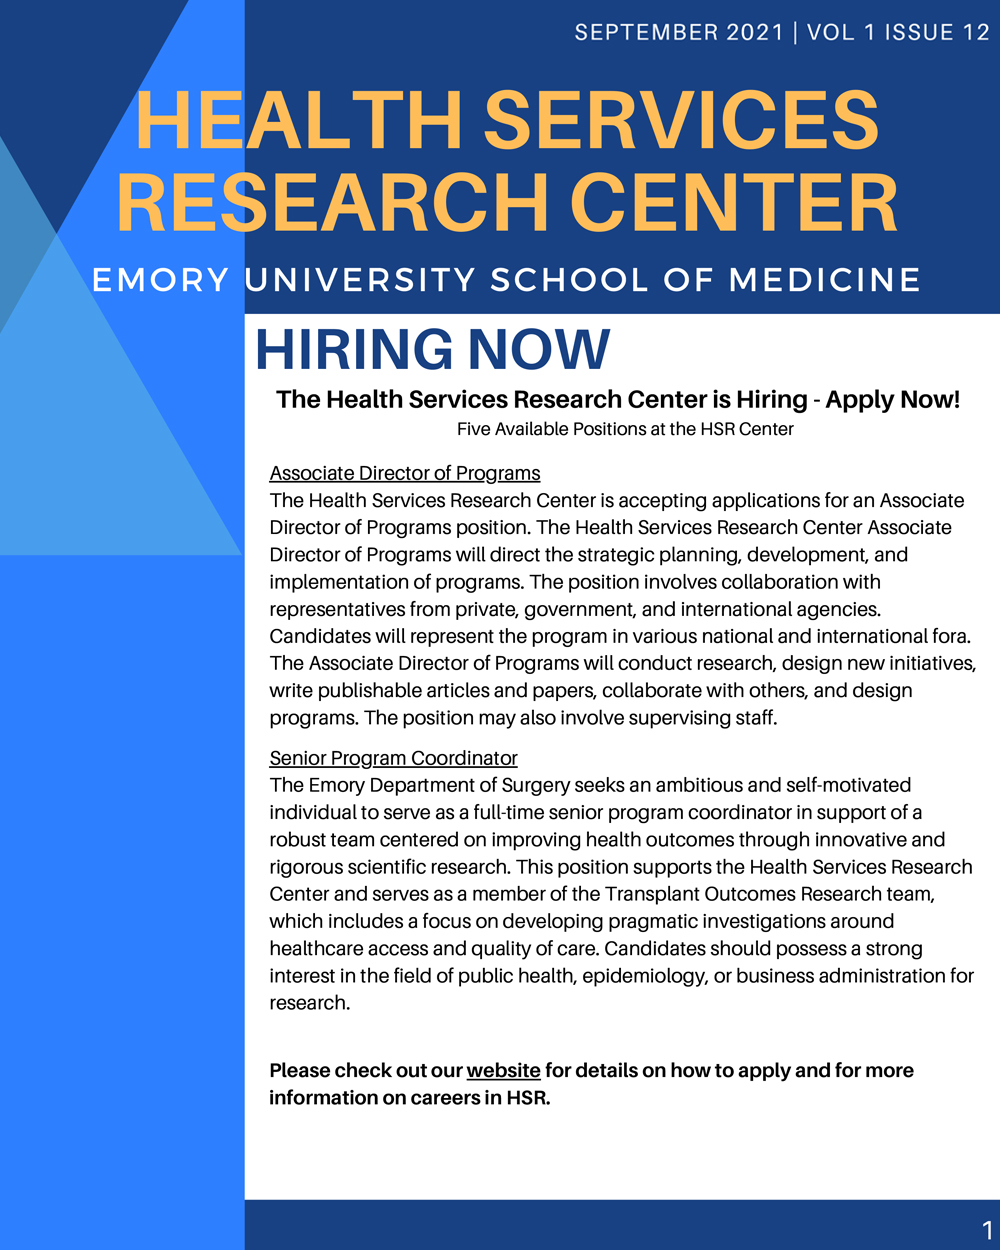 Health Services Research Center 9/2021 Newsletter